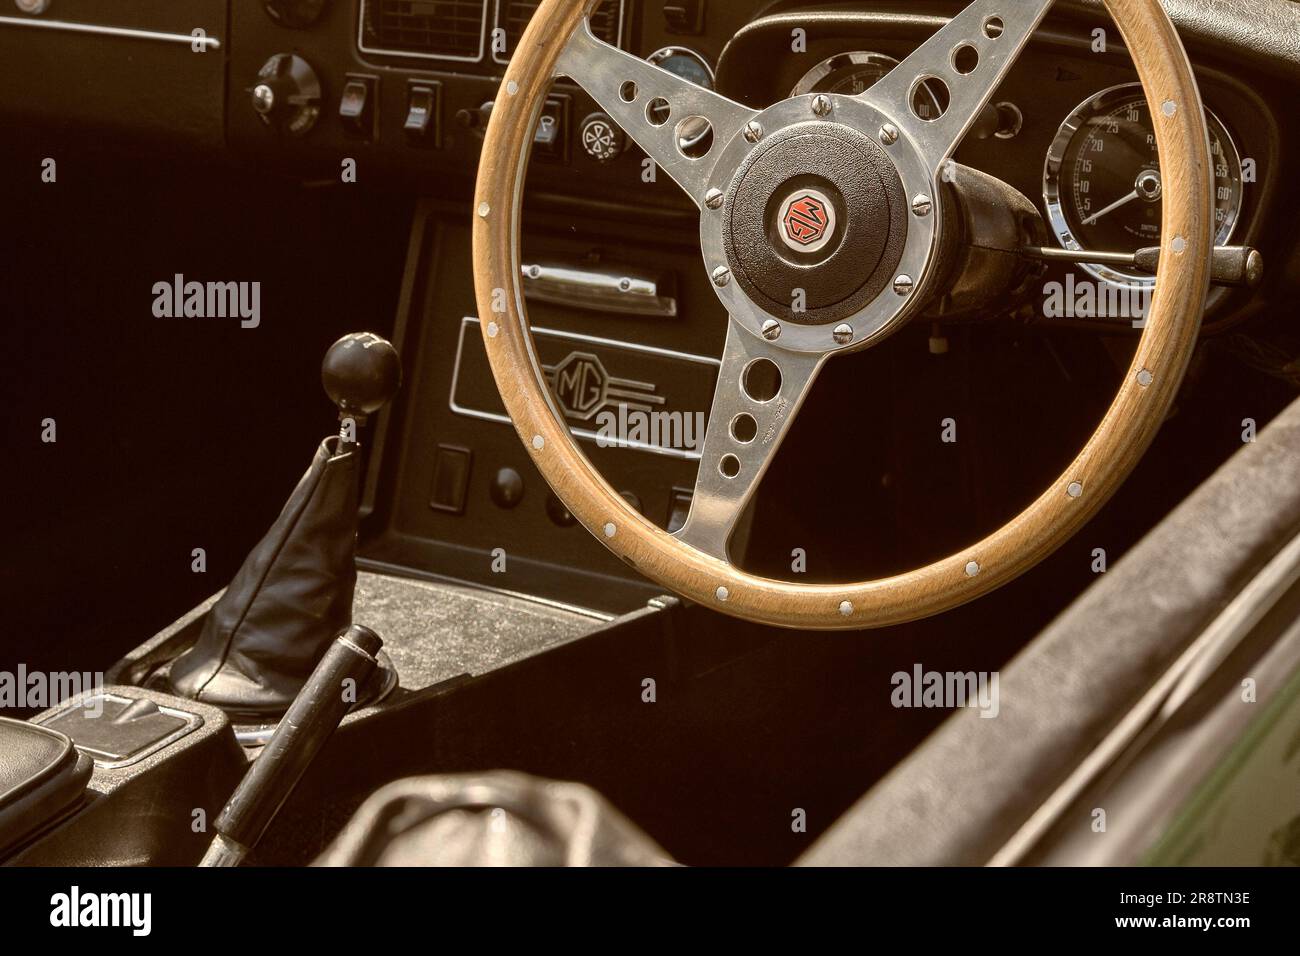 The interior of a 1970s MGB Roadster, showing the MG logo, dashboard and wooden steering wheel. British sports car at a classic and vintage car show. Stock Photo